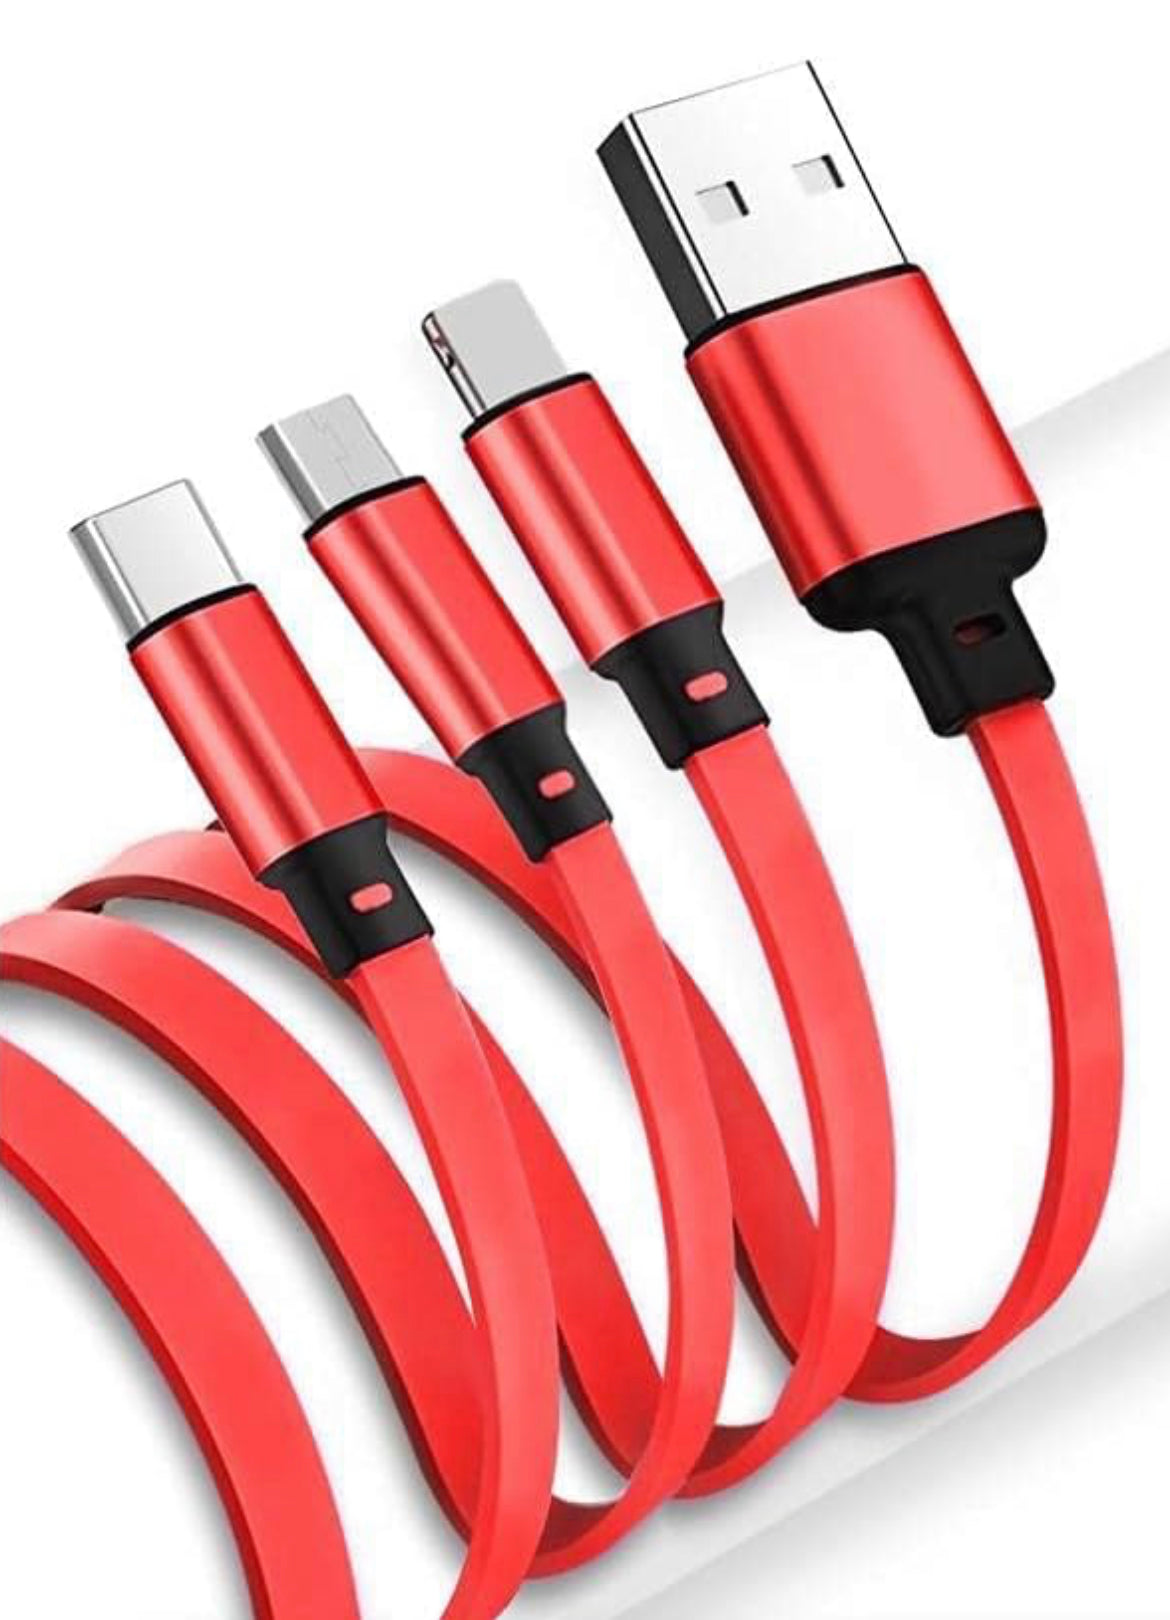 Retractable 3.0A Fast Charger Cord, Multiple Charging Cable 4Ft/1.2m 3-in-1 USB Charge Cord Compatible with Phone/Type C/Micro USB for All Android and iOS Smartphones (Random Colour)